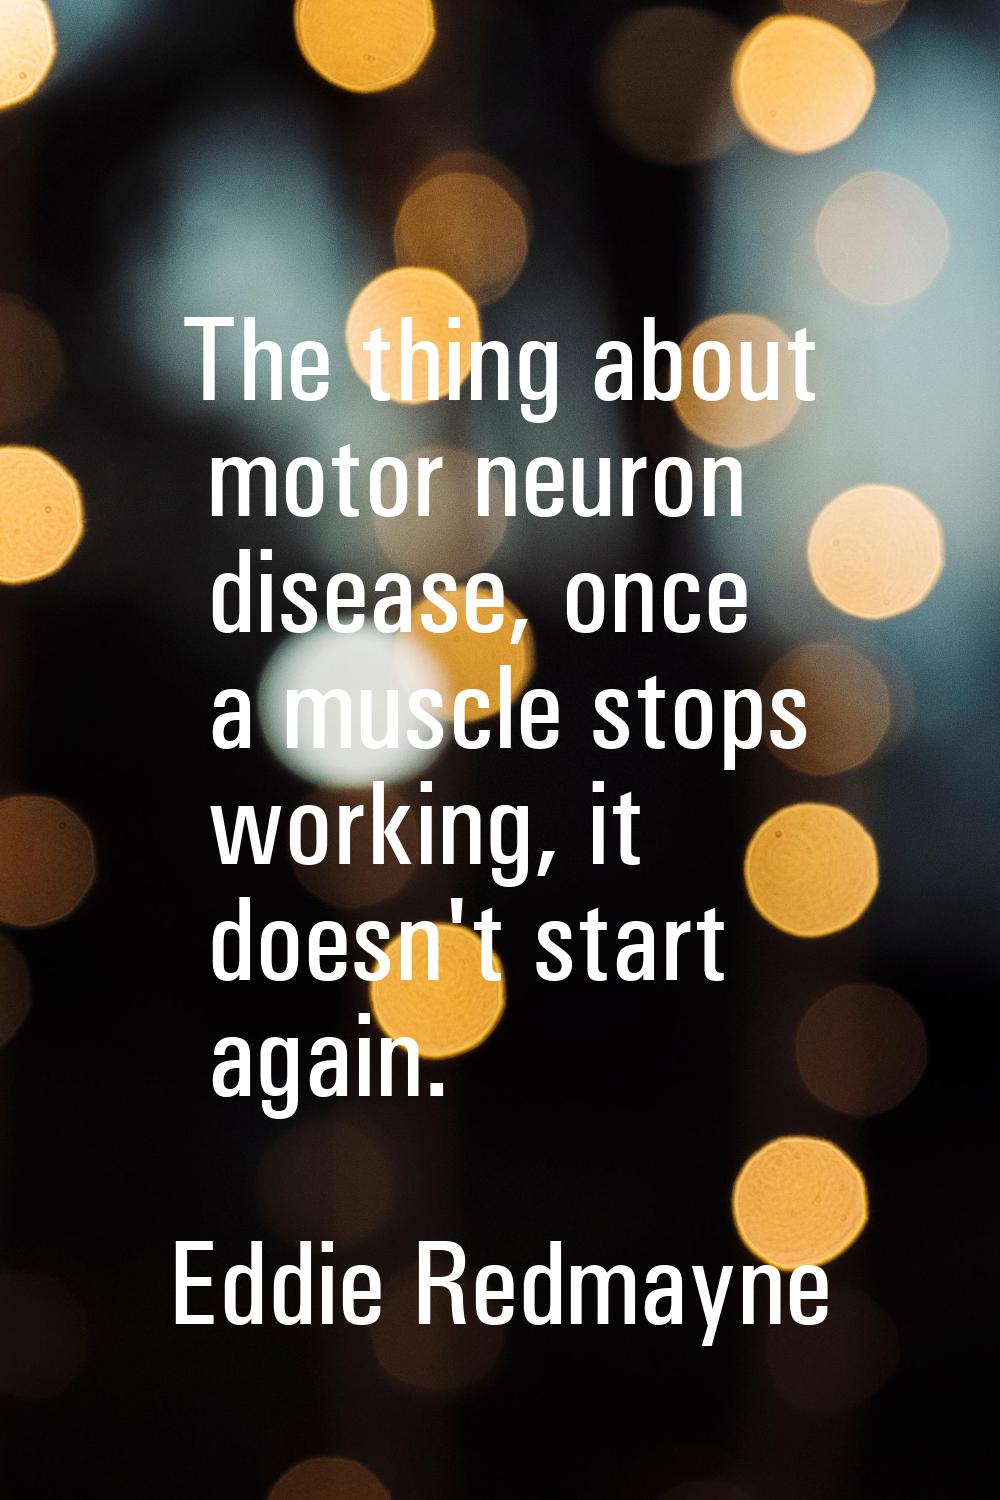 The thing about motor neuron disease, once a muscle stops working, it doesn't start again.